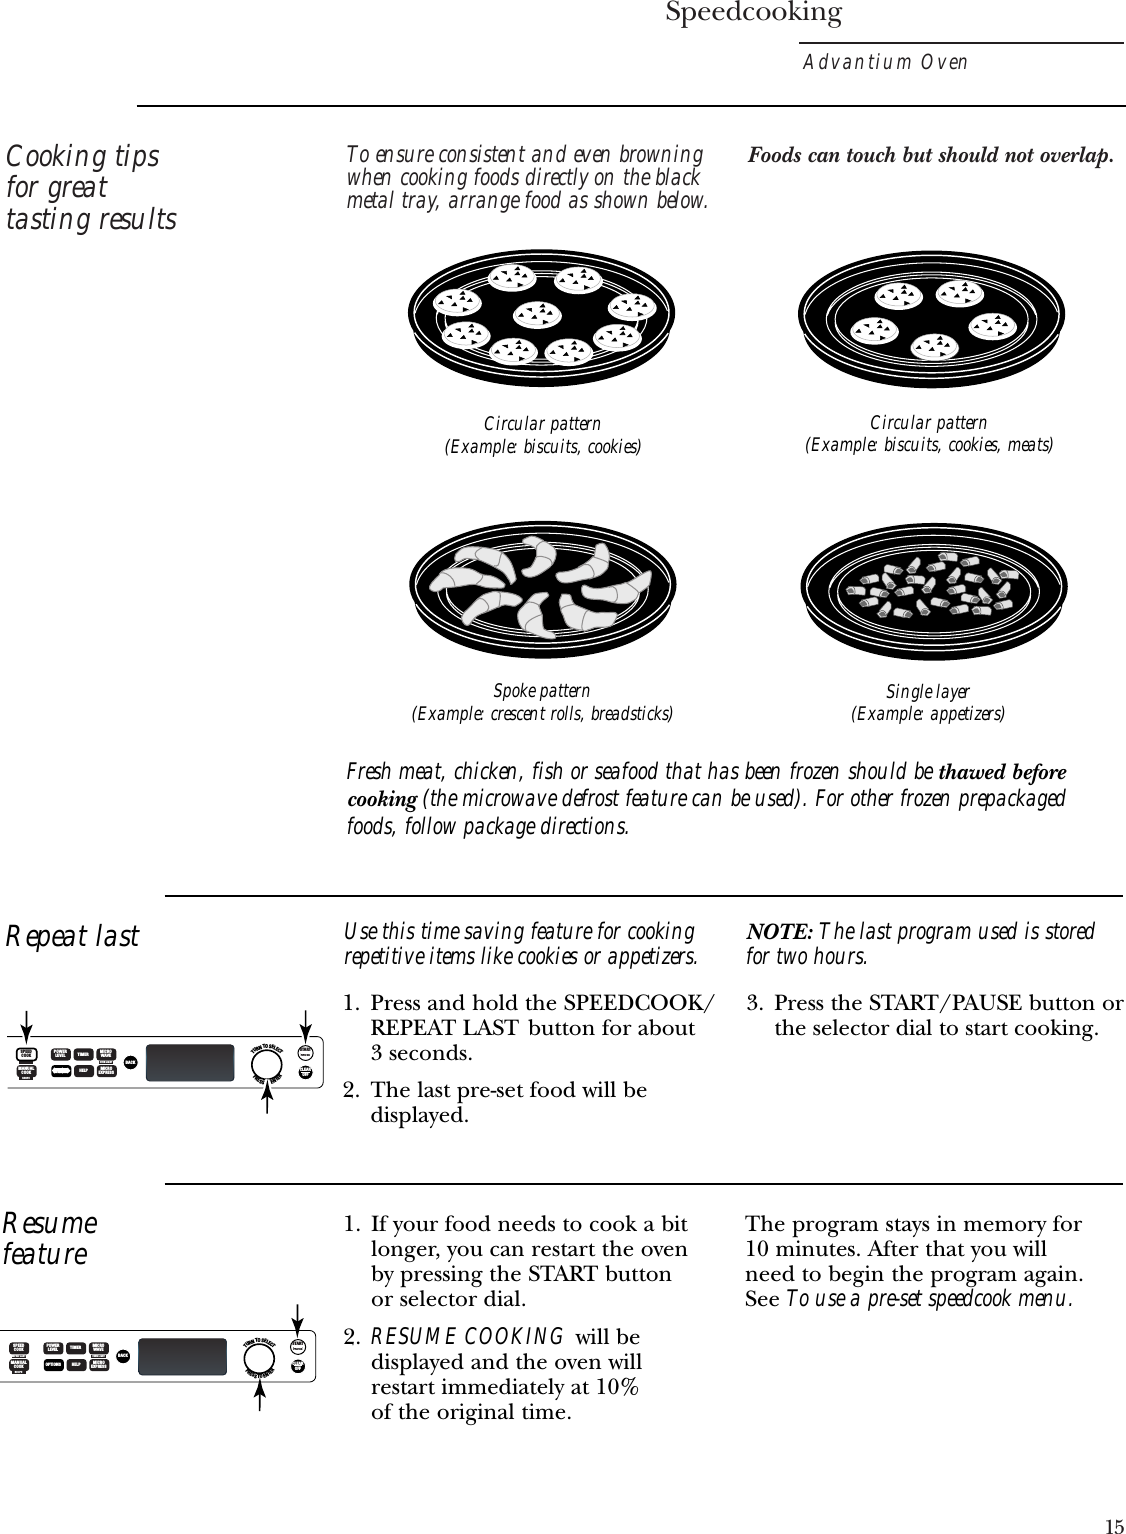 SpeedcookingAdvantium Oven15Cooking tipsfor greattasting resultsTo ensure consistent and even browningwhen cooking foods directly on the blackmetal tray, arrange food as shown below.Foods can touch but should not overlap.Circular pattern(Example: biscuits, cookies)Spoke pattern(Example: crescent rolls, breadsticks) Single layer(Example: appetizers)Circular pattern(Example: biscuits, cookies, meats)Repeat last1. Press and hold the SPEEDCOOK/REPEAT LAST button for about 3 seconds.2. The last pre-set food will bedisplayed.3. Press the START/PAUSE button orthe selector dial to start cooking.Use this time saving feature for cookingrepetitive items like cookies or appetizers. NOTE: The last program used is storedfor two hours.Resumefeature1. If your food needs to cook a bitlonger, you can restart the oven by pressing the START button or selector dial.2. RESUME COOKING will bedisplayed and the oven will restart immediately at 10% of the original time.The program stays in memory for 10 minutes. After that you will need to begin the program again. See To use a pre-set speedcook menu.Fresh meat, chicken, fish or seafood that has been frozen should be thawed beforecooking (the microwave defrost feature can be used). For other frozen prepackagedfoods, follow package directions.TURNTOSELECTPRESSTOENTERSTARTPAUSECLEAROFFBACKPOWERLEVELMANUALCOOK OPTIONSOPTIONSTIMERHELPMICROWAVEMICROEXPRESSOVEN LIGHTRECIPESPEEDCOOKOPTIONSTURNTOSELECTPRESSTOENTERSTARTPAUSECLEAROFFBACKPOWERLEVELSPEEDCOOKMANUALCOOK OPTIONSTIMERHELPMICROWAVEMICROEXPRESSREPEAT LAST OVEN LIGHTRECIPE